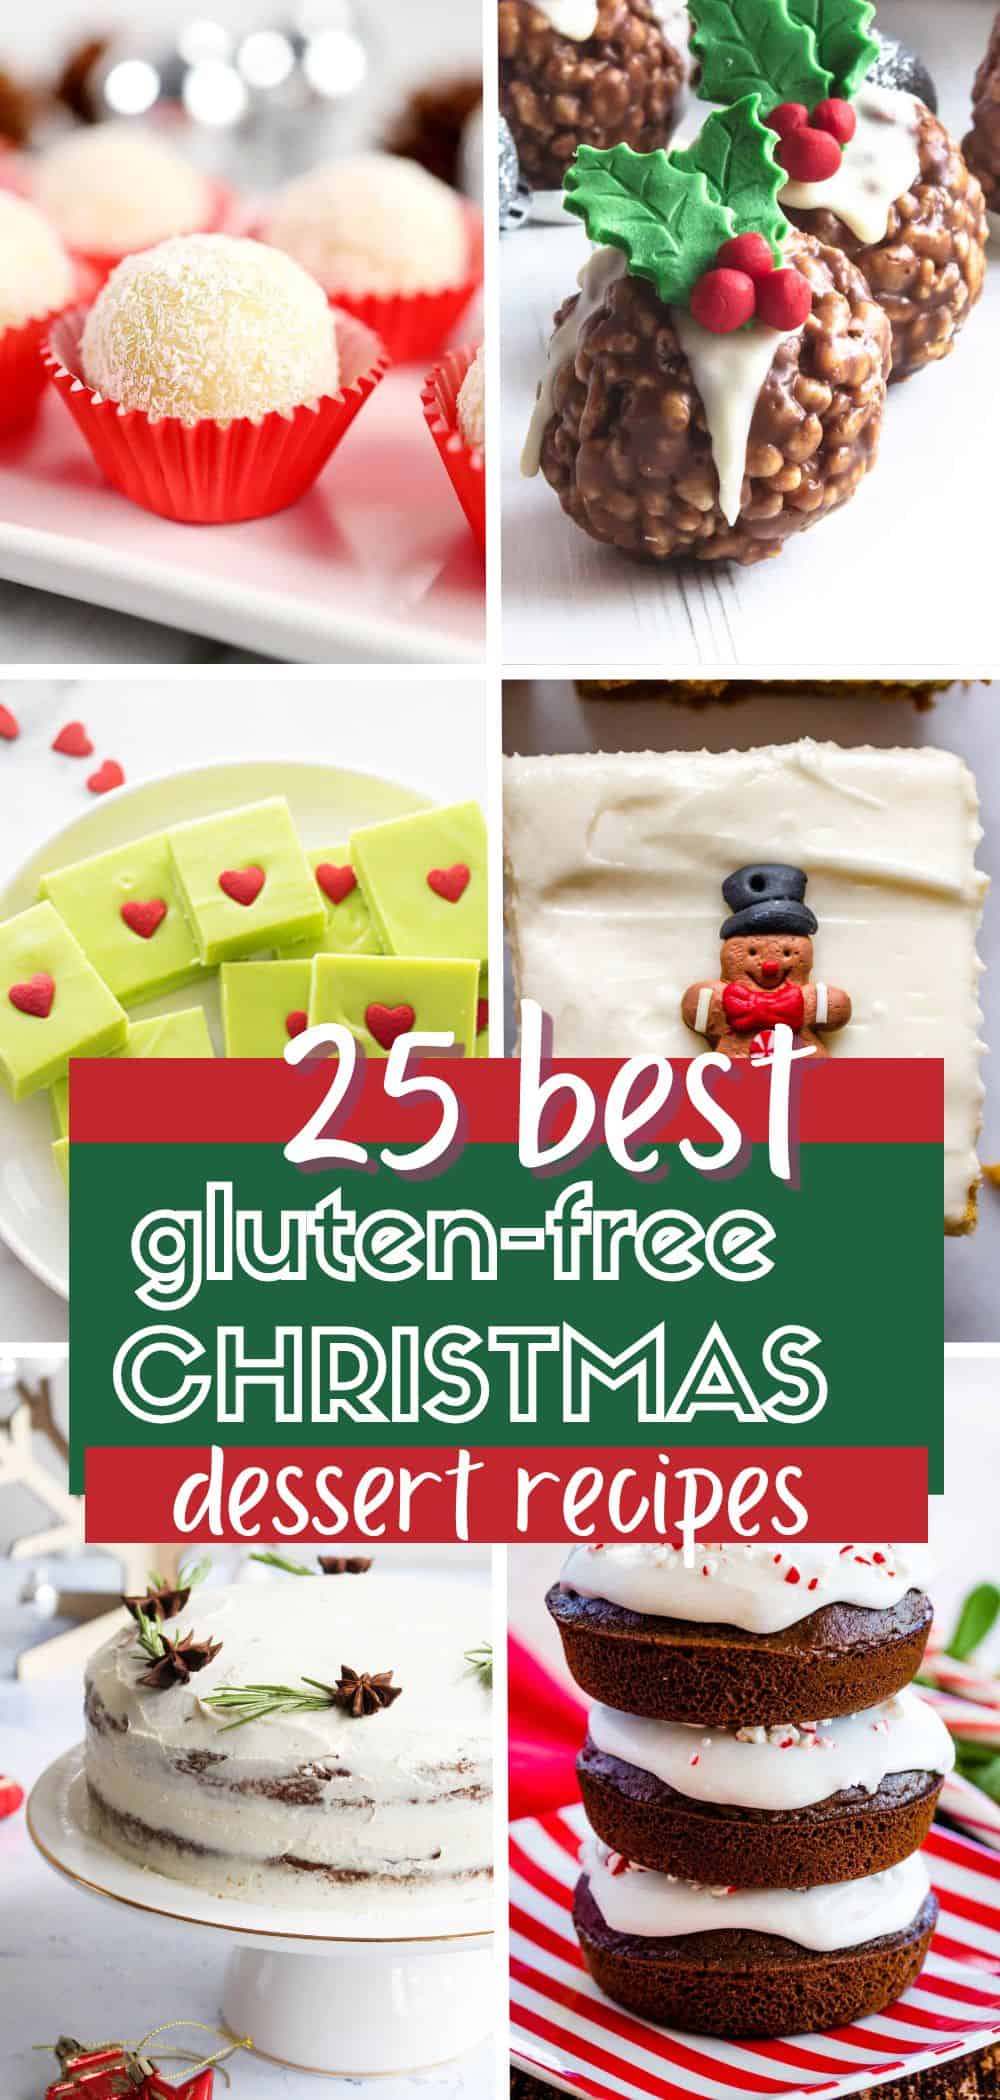 a collage of gluten-free Christmas desserts